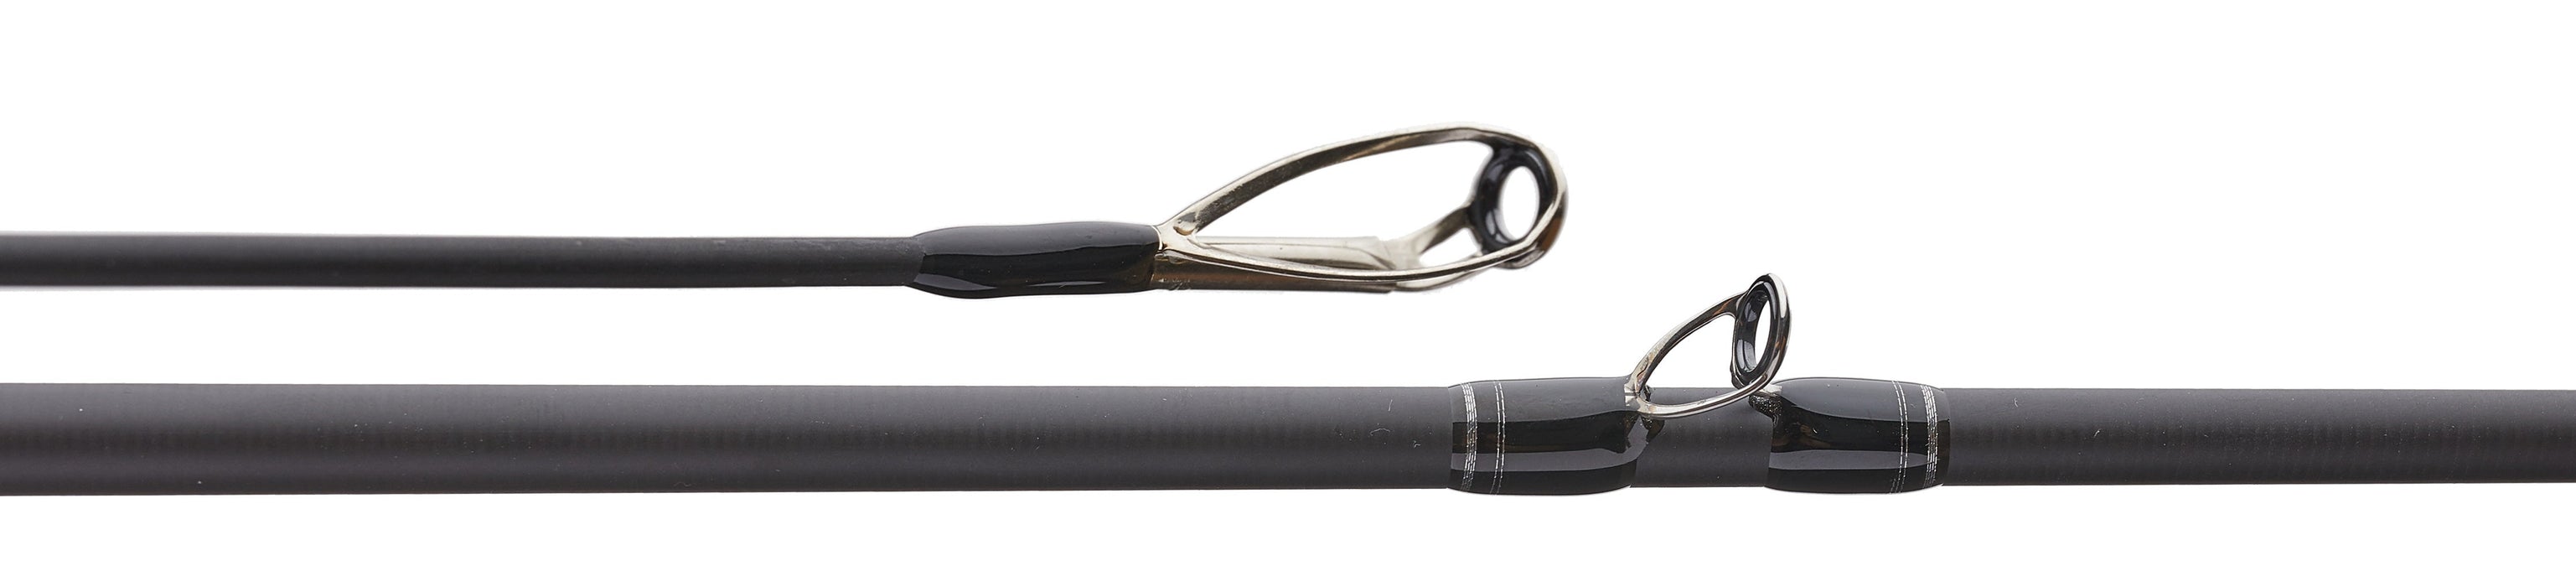 13 Fishing Envy Black 2 Casting Rods — Discount Tackle